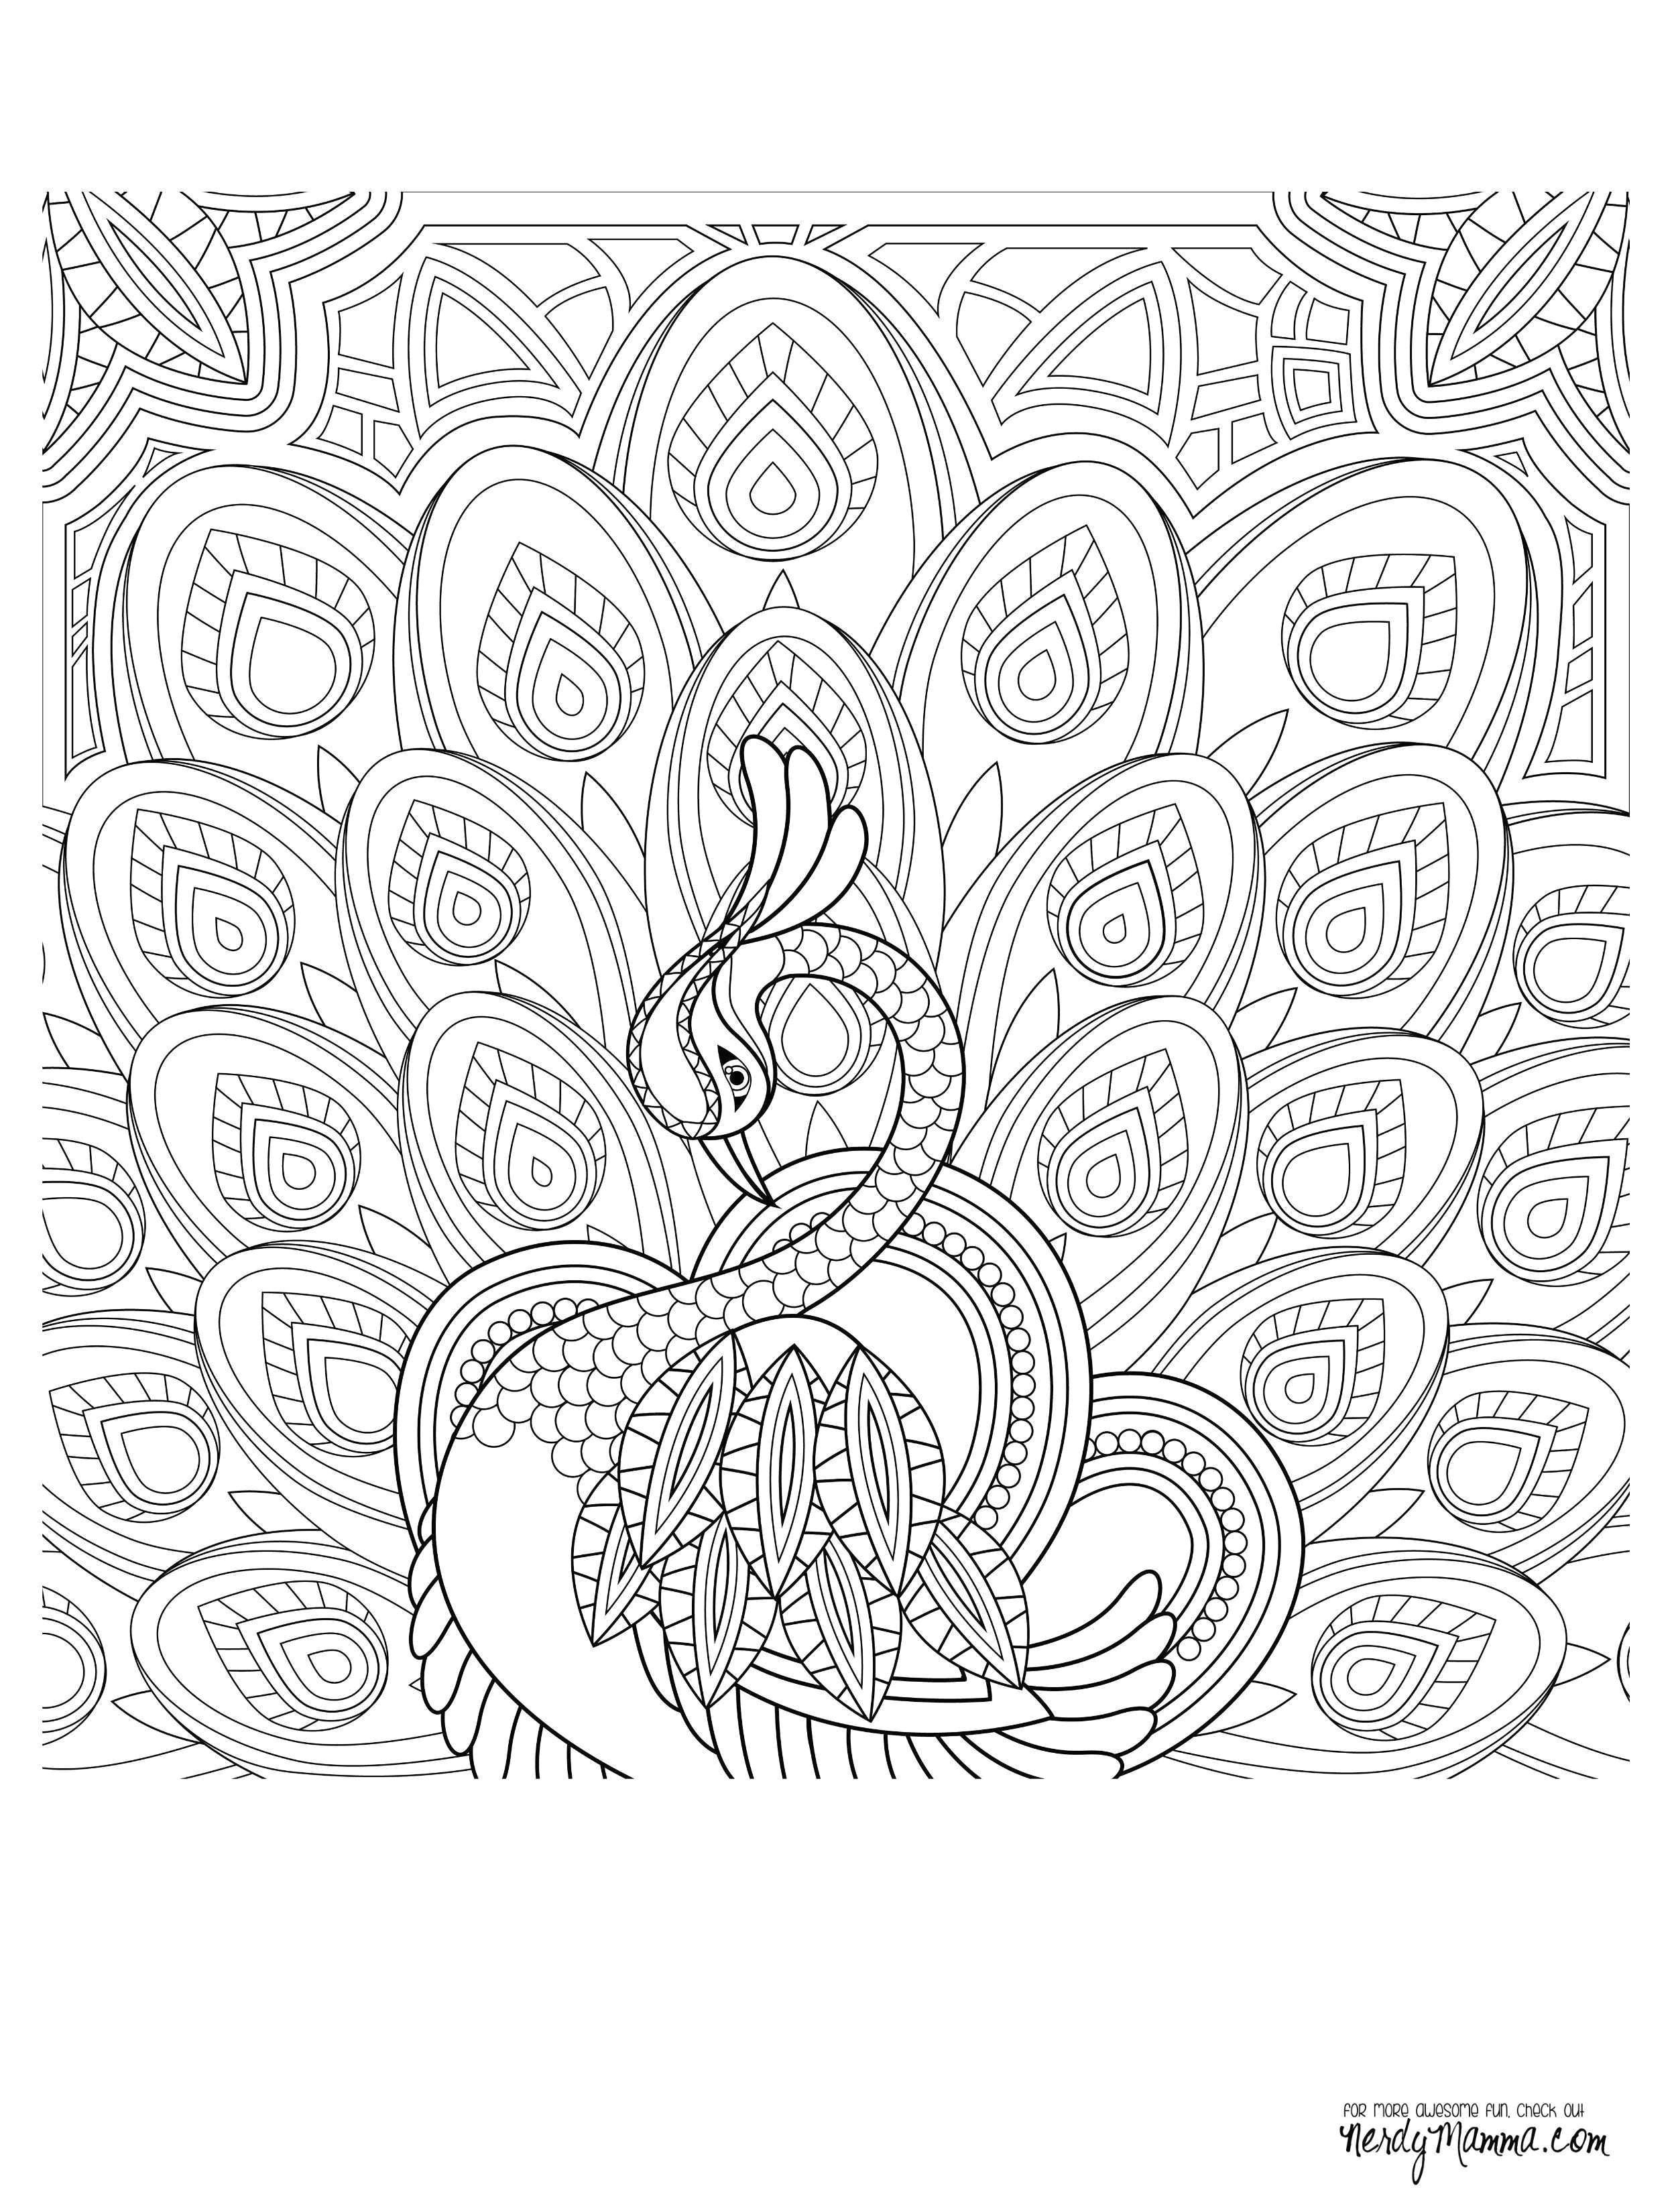 Ava G Drawings Images Of Coloring Pages Unique Mal Coloring Pages Fresh Crayola